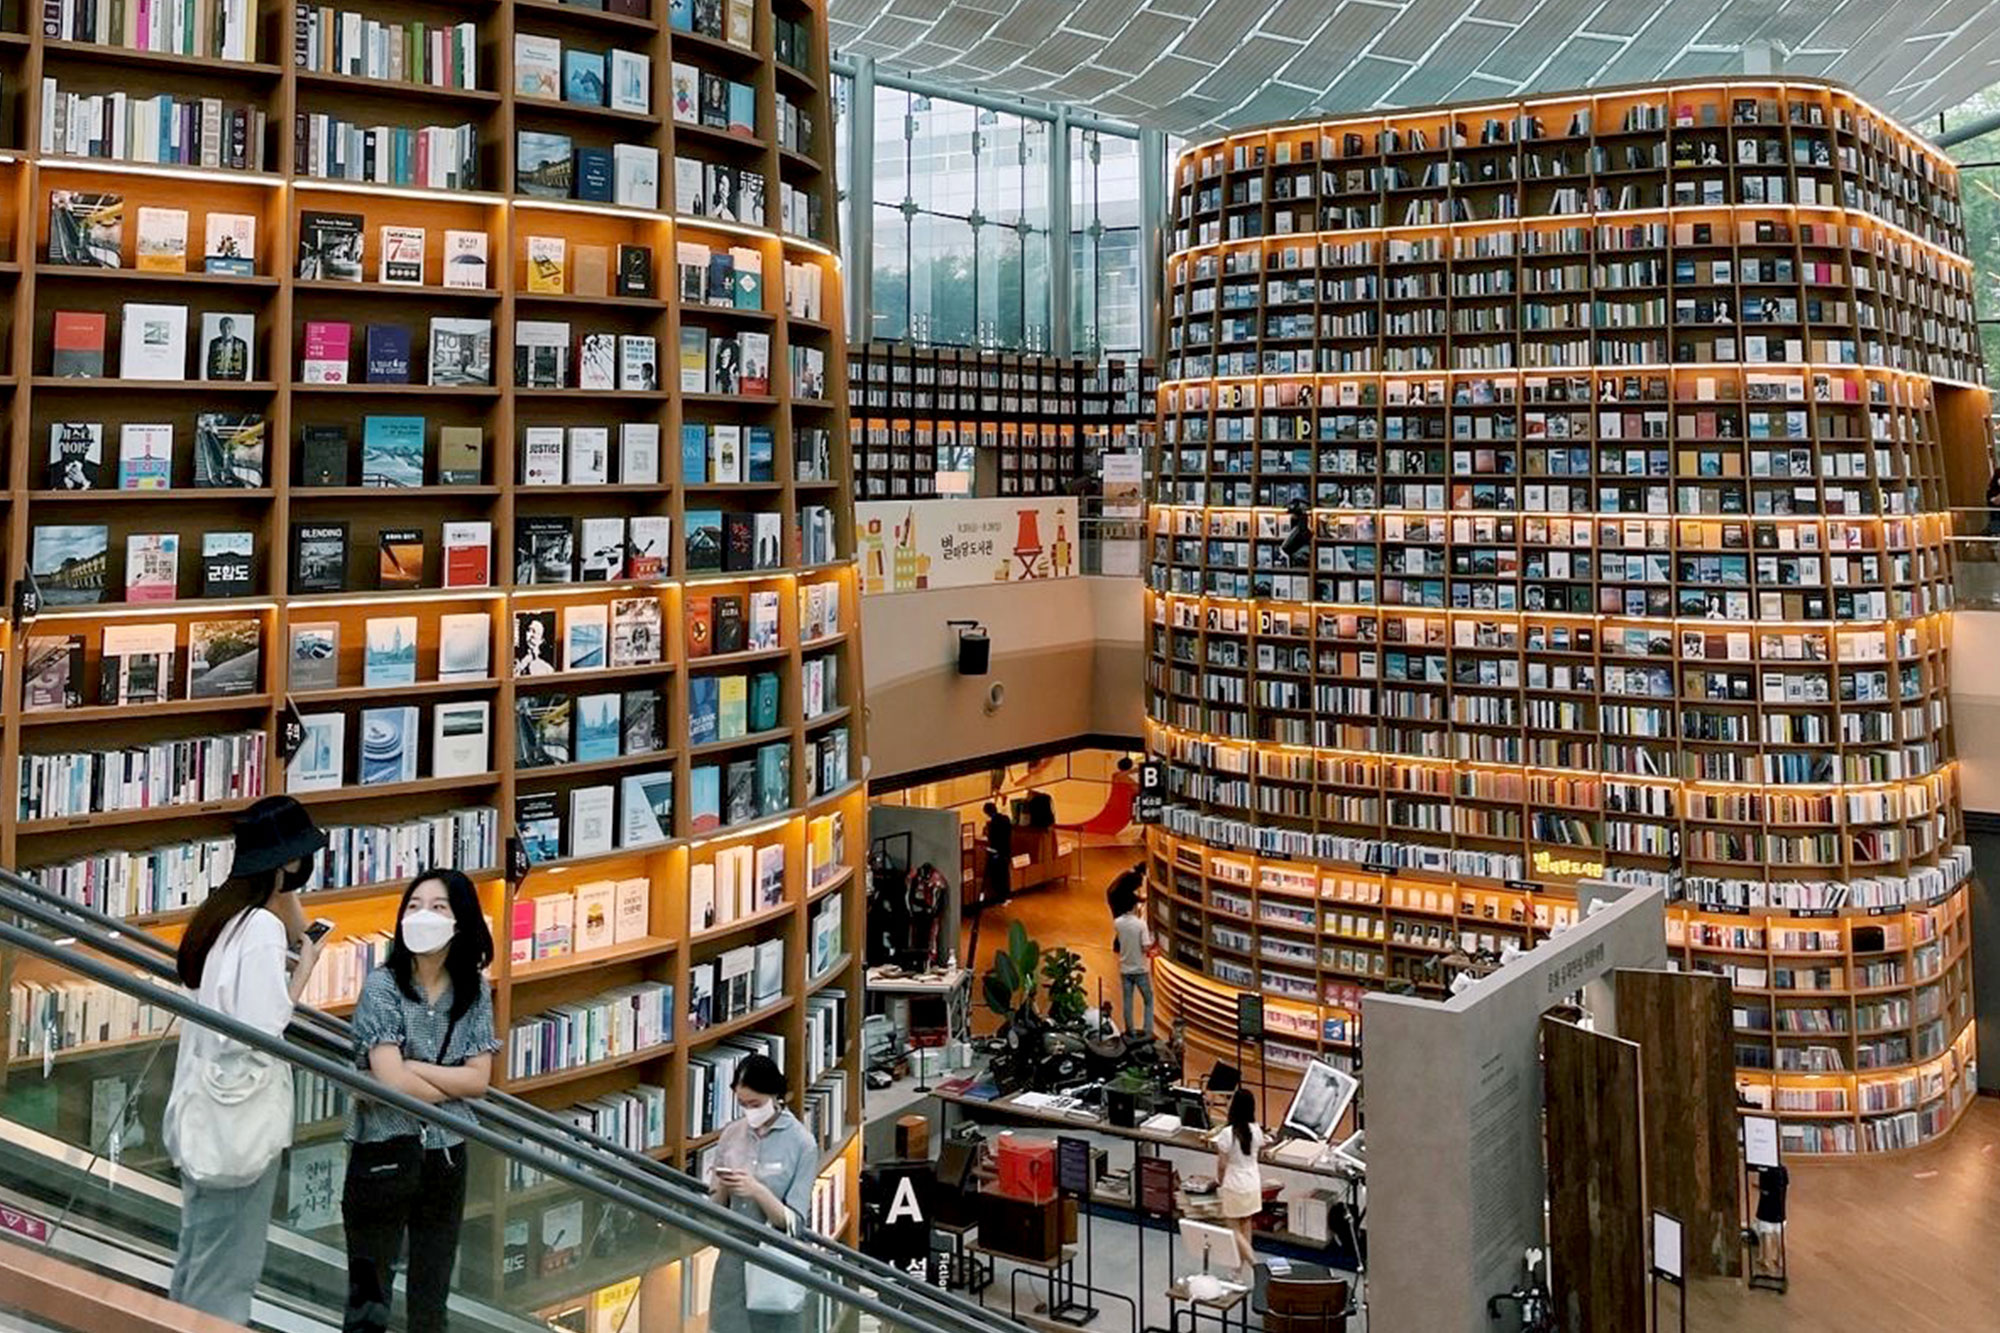 students on escalator in library with floor to ceiling bookshelves